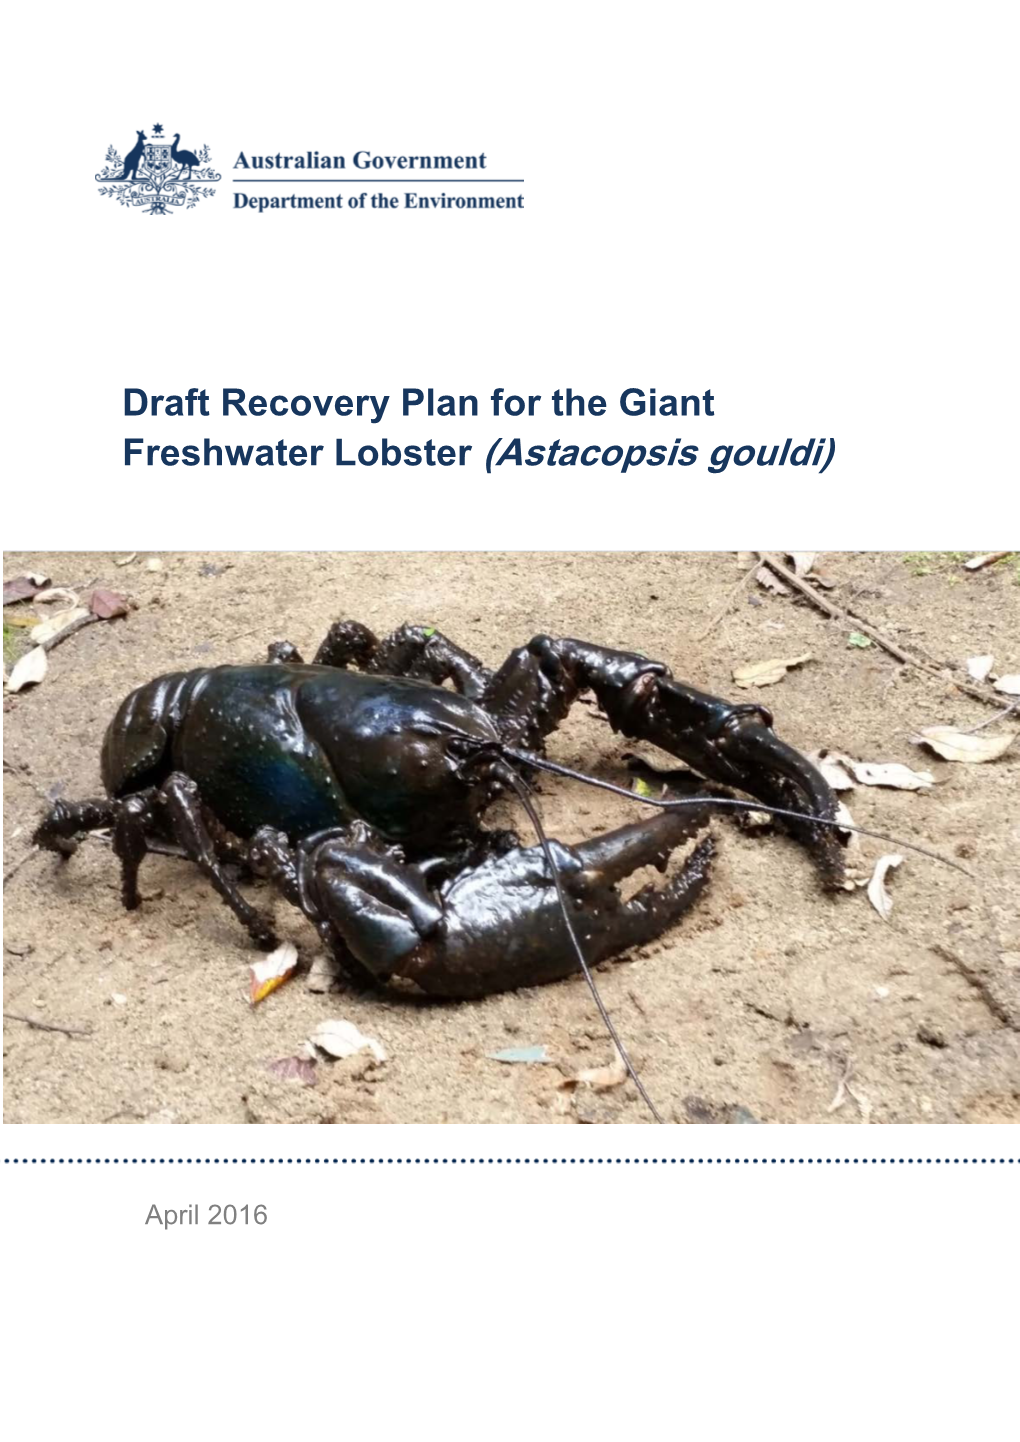 Draft Recovery Plan for the Giant Freshwater Lobster (Astacopsis Gouldi)